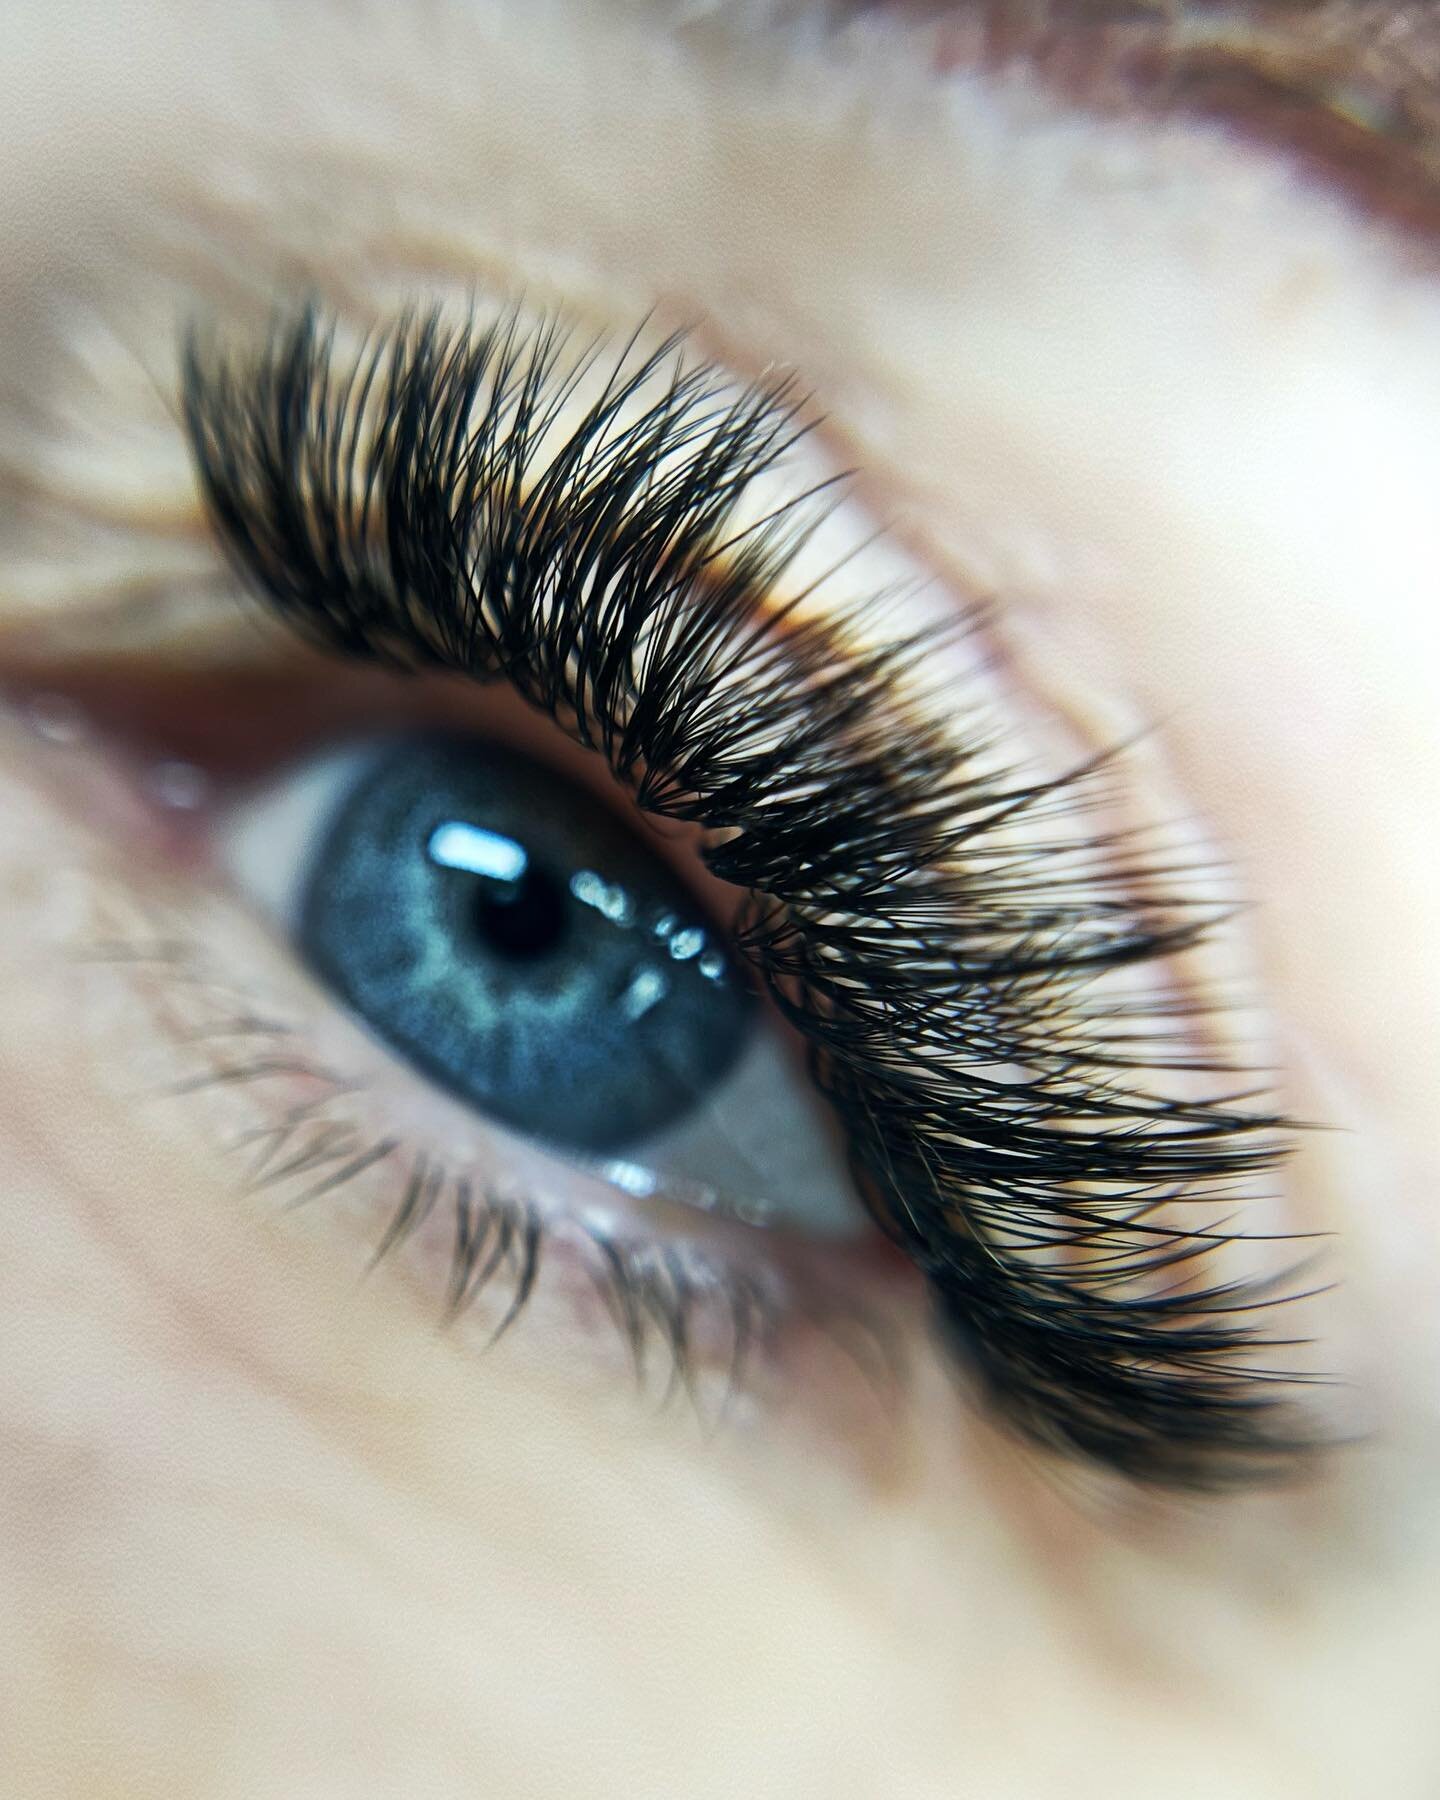 Want to know the secret to aging gracefully? 🤫

🔑 the answer will shock you&hellip; Eyelash Extensions! They will make look more youthful, rested and enhance your natural beauty. 

👉 Book your lash appointment today by doing 1️⃣ of the following👇